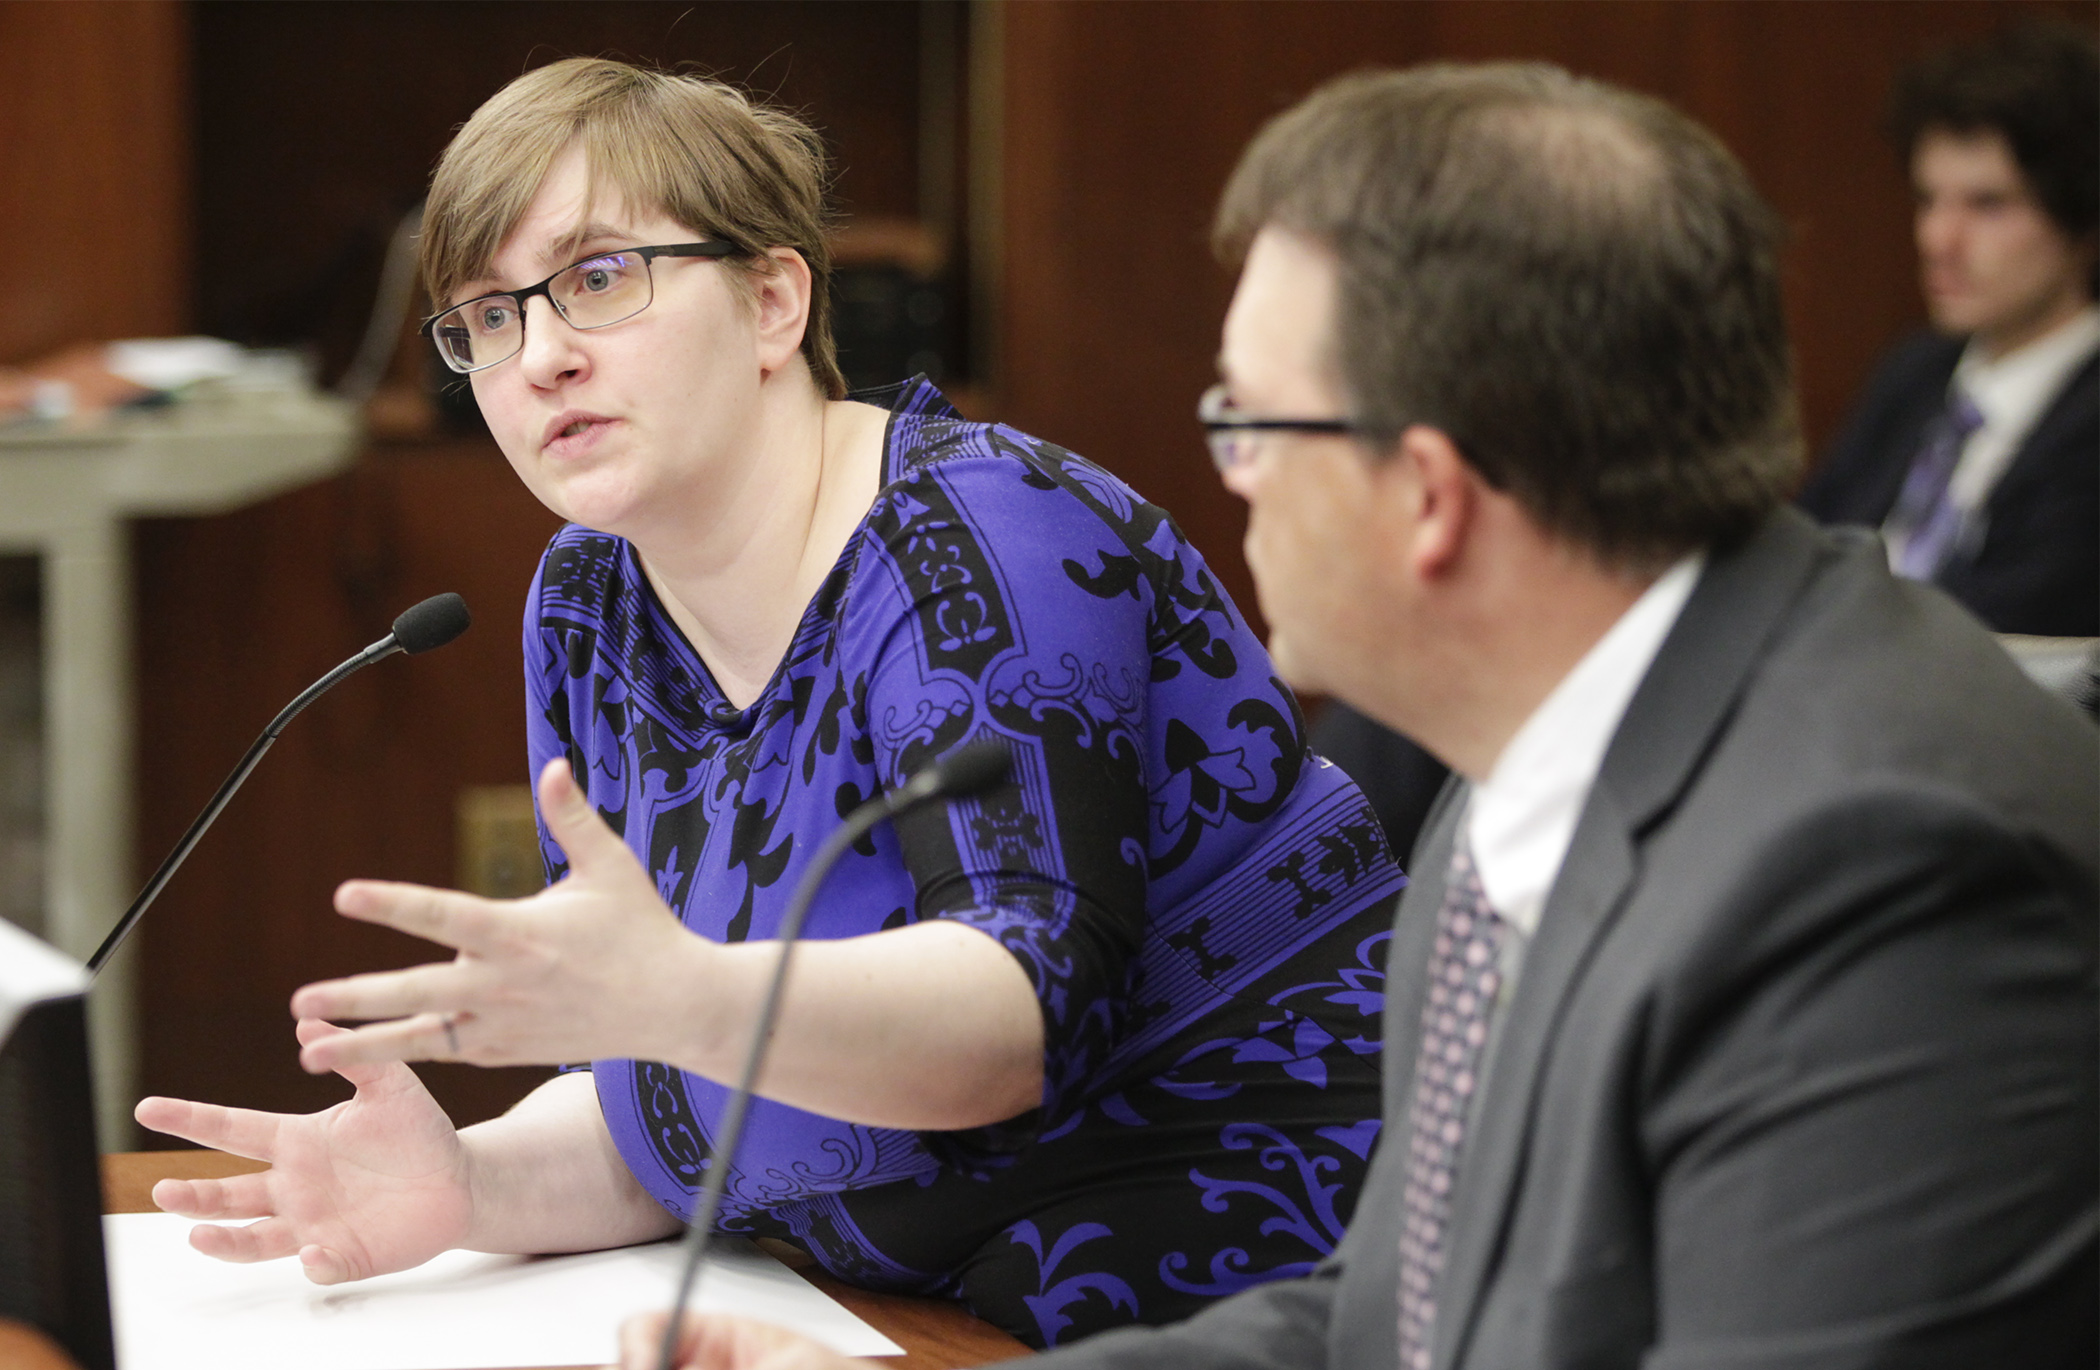 Betsy Talbot, the Office of Higher Education’s manager of instructional registration and licensing, goes through details of HF2849 during an April 26 meeting of the House Higher Education Finance and Policy Division. Photo by Paul Battaglia